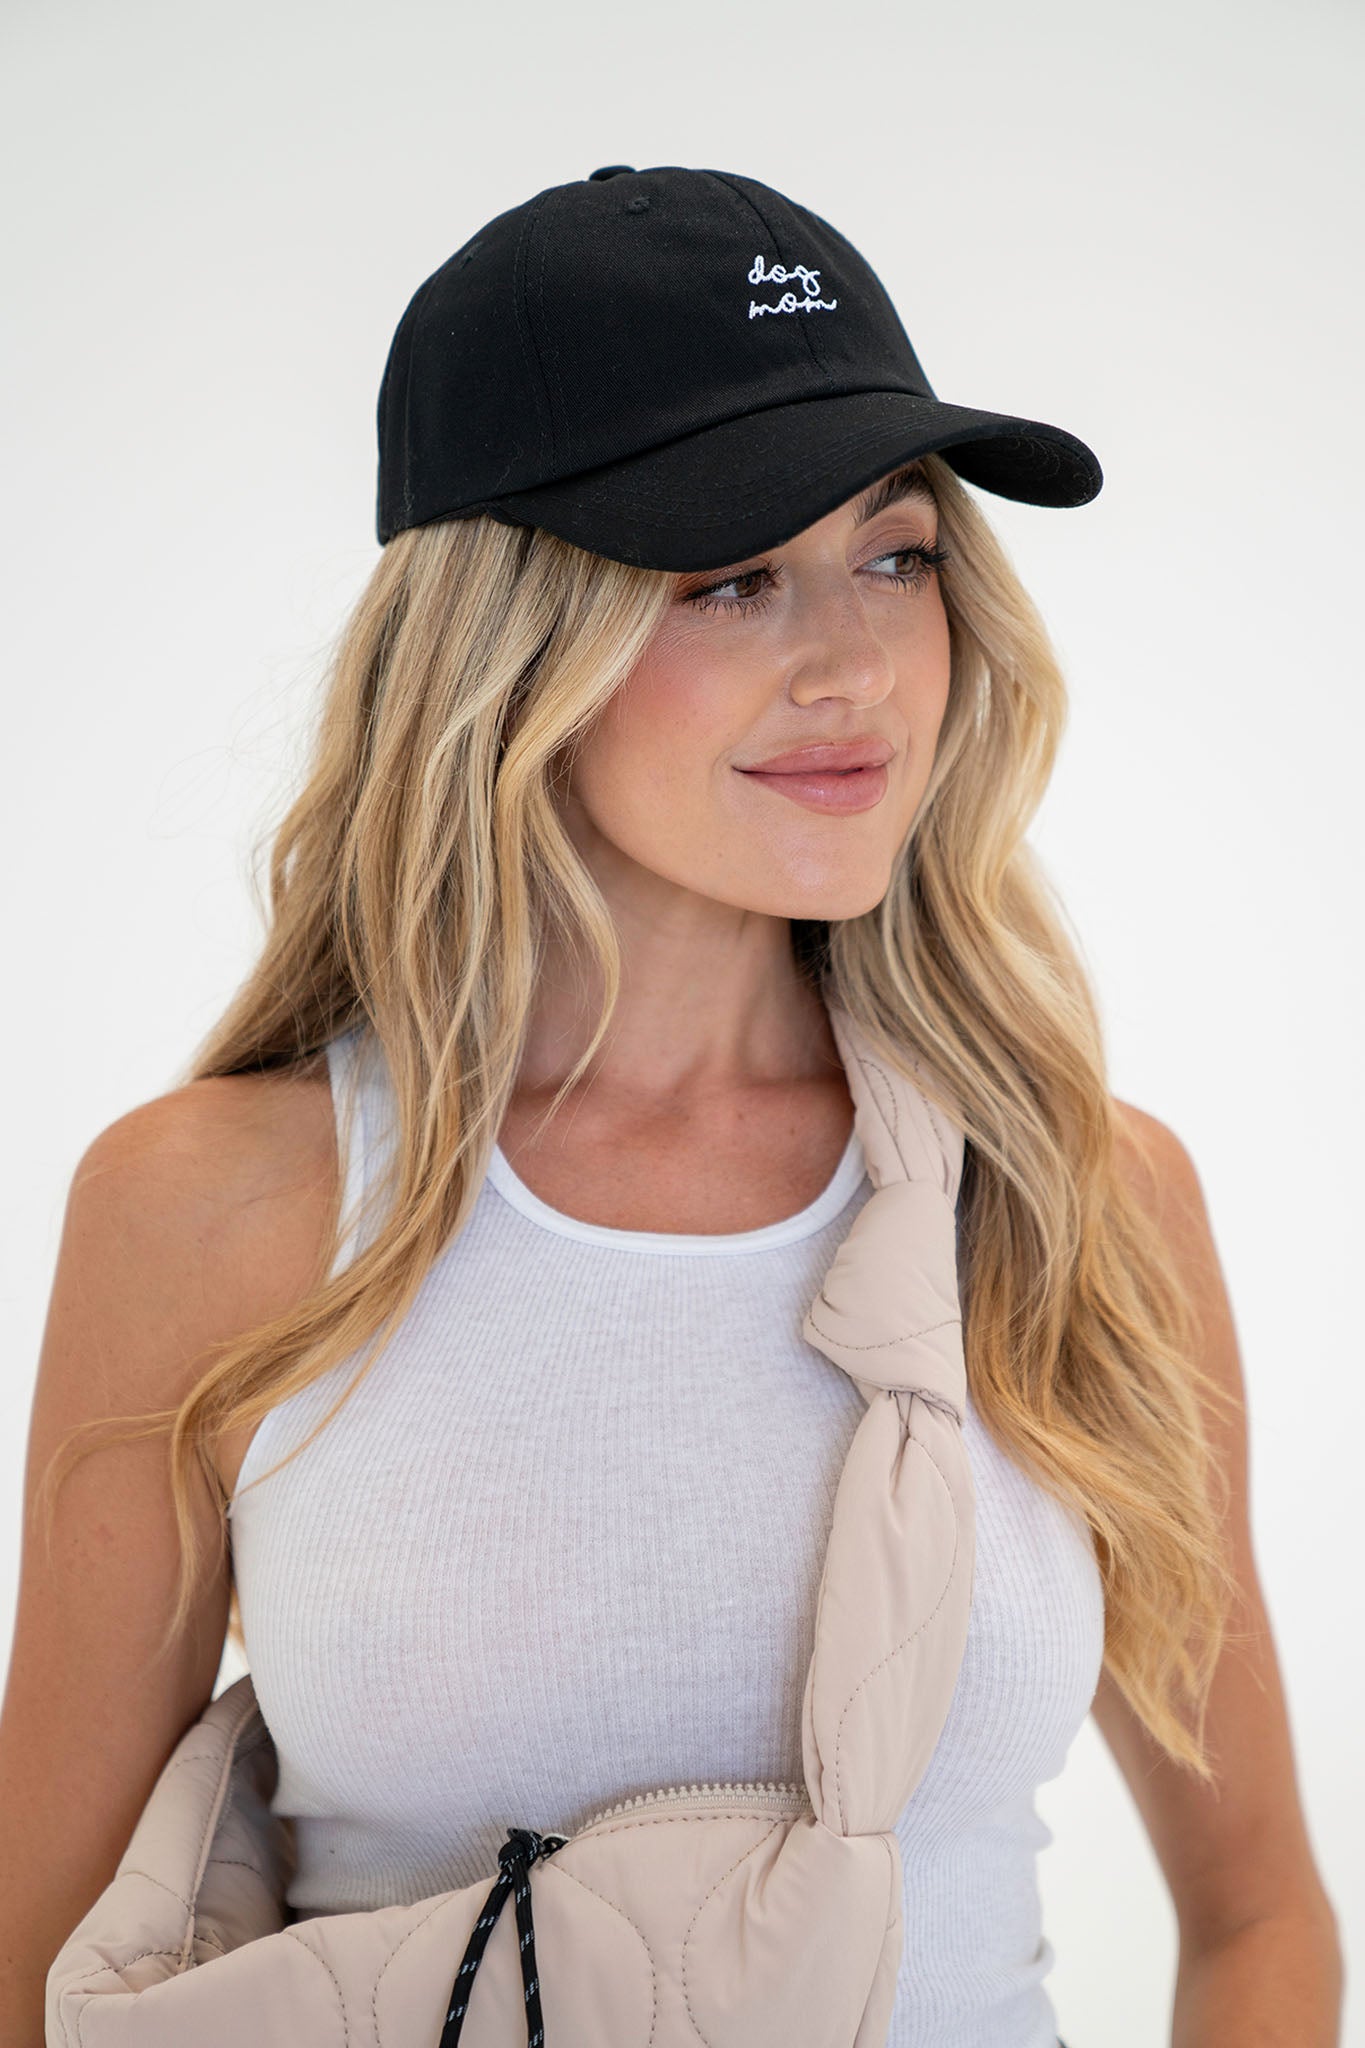 View 1 of Dog Mom Hat in Black, a Hats from Larrea Cove. Detail: This classic dad hat features the slogan "dog mom" embroi...